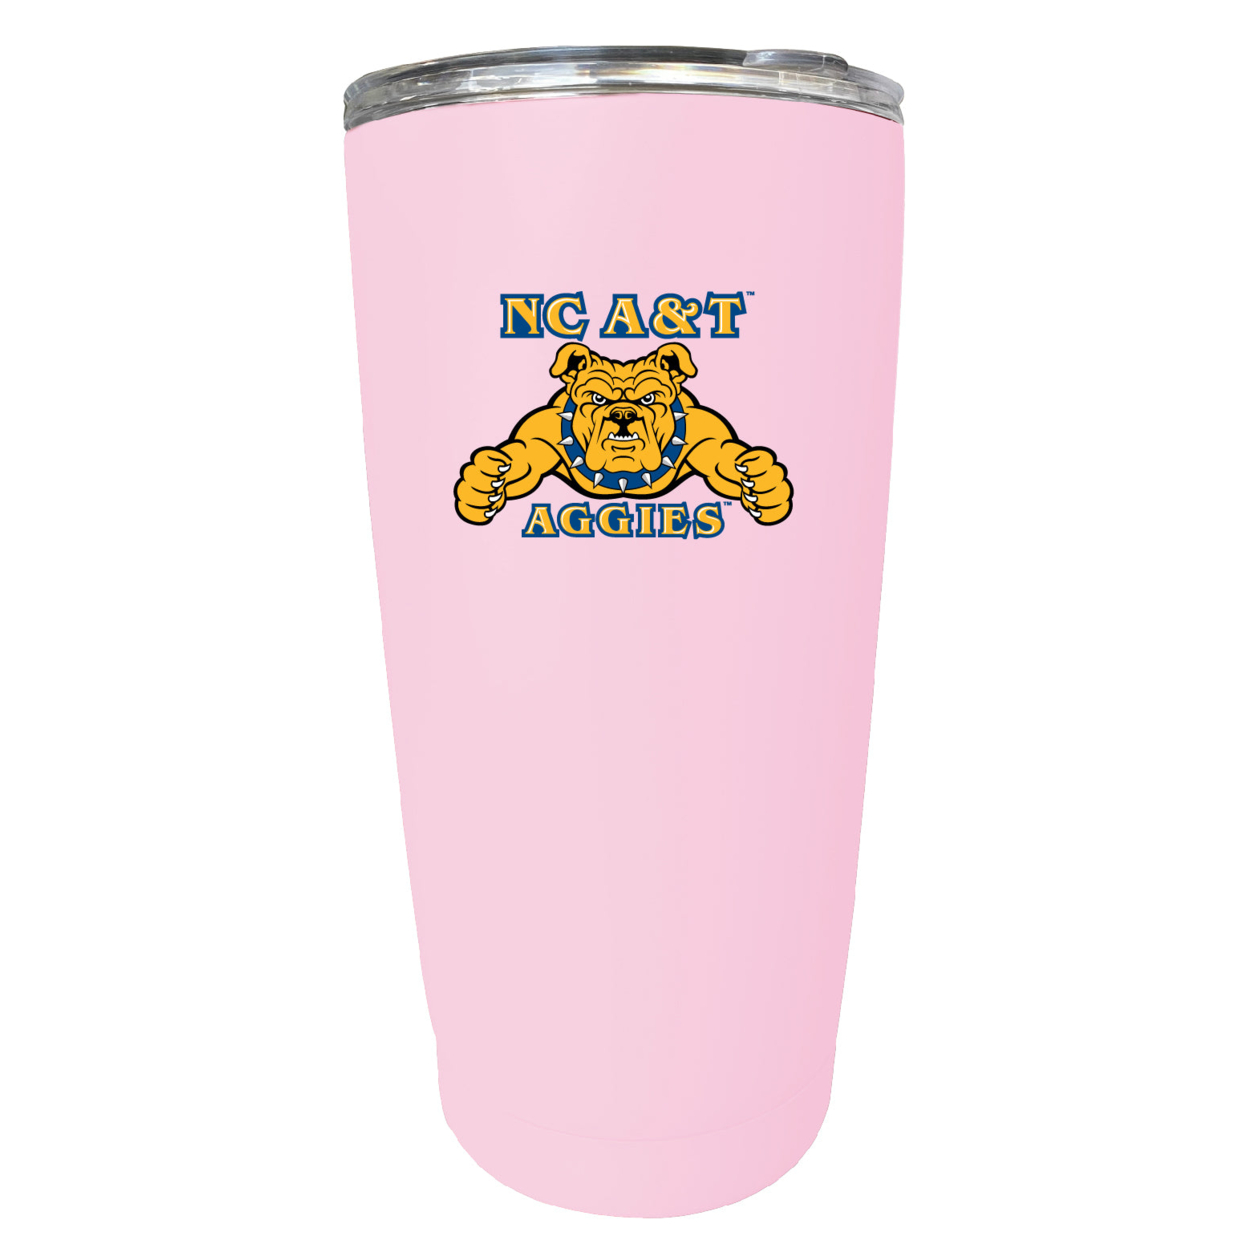 North Carolina A&T State Aggies 16 Oz Stainless Steel Insulated Tumbler - Yellow